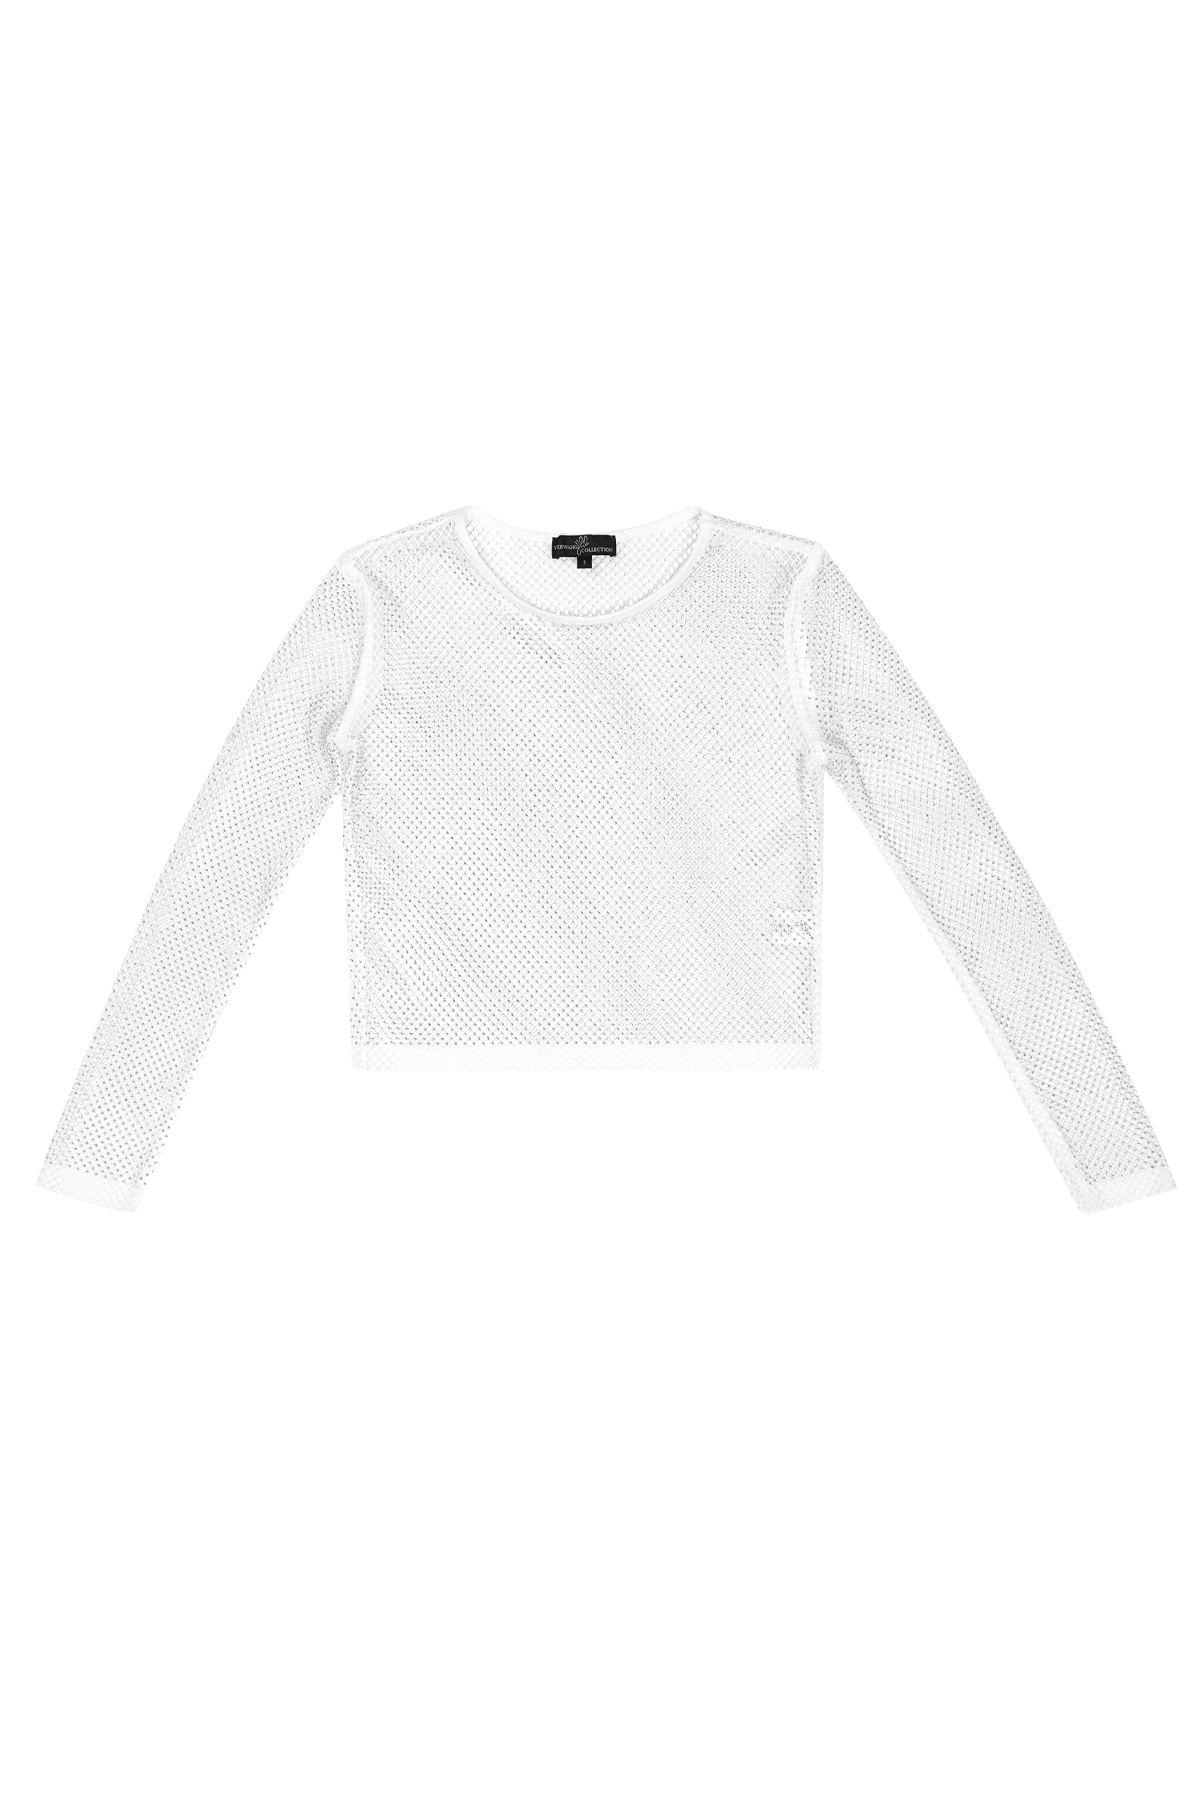 Sparkly long sleeve top - white - S 